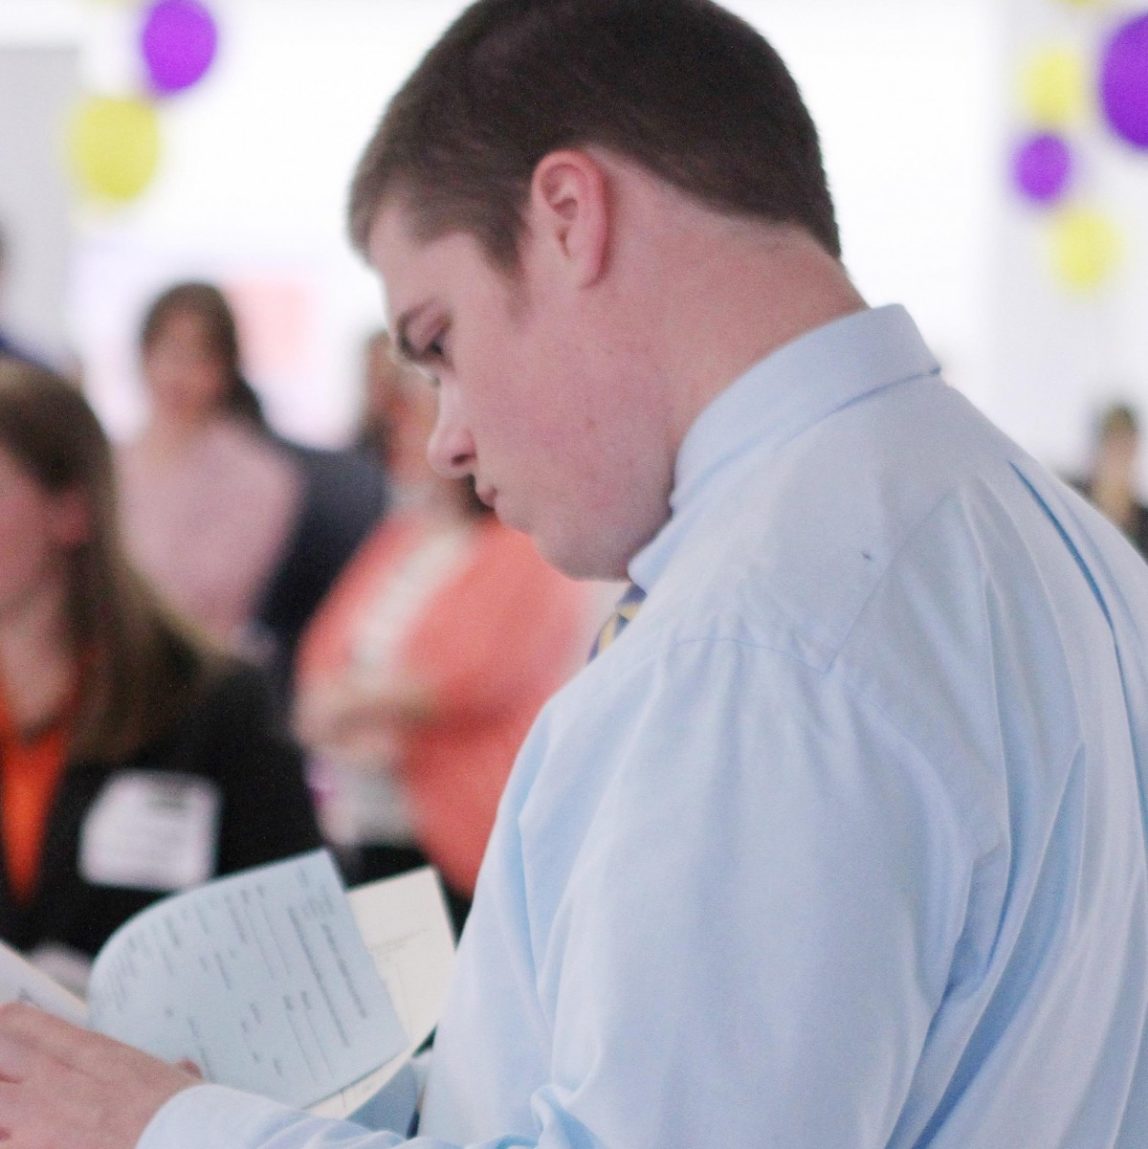 In this April 4, 2012, file photo, Scott Richards of Saint Anselm College looks over possible jobs during a career fair for college students in Manchester, N.H. (AP Photo/Jim Cole, File)